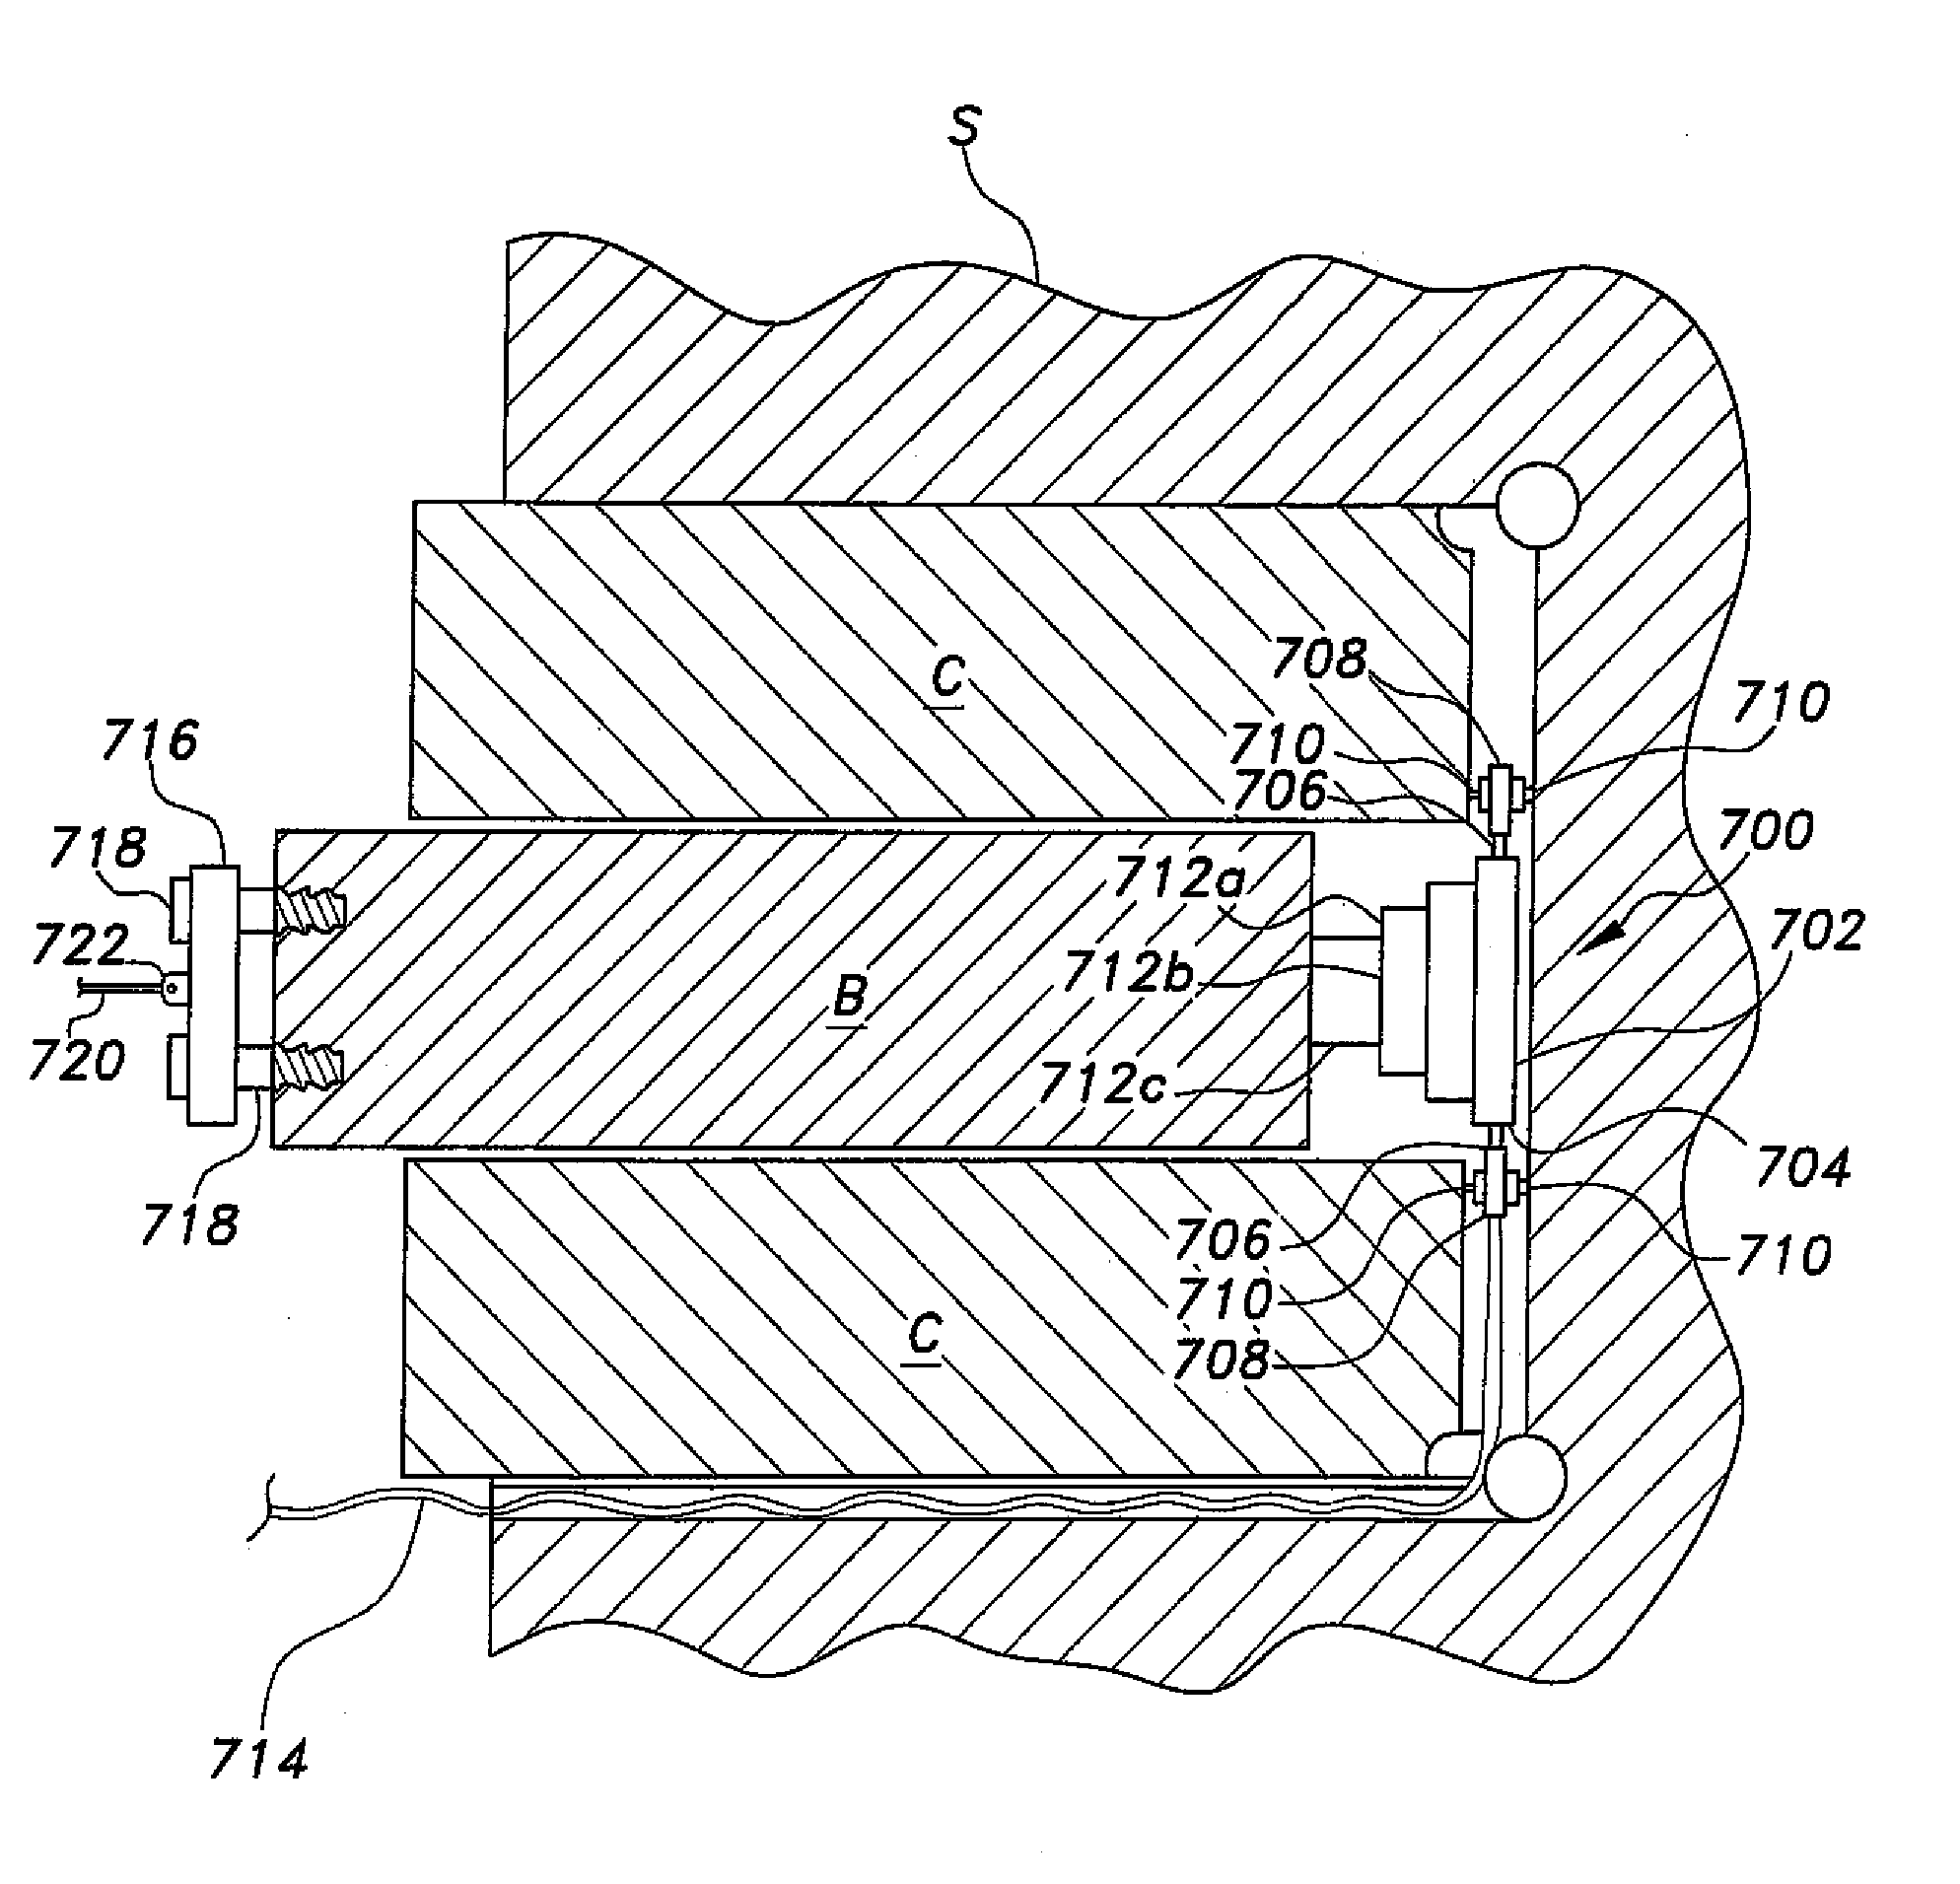 Method for wire saw excavation